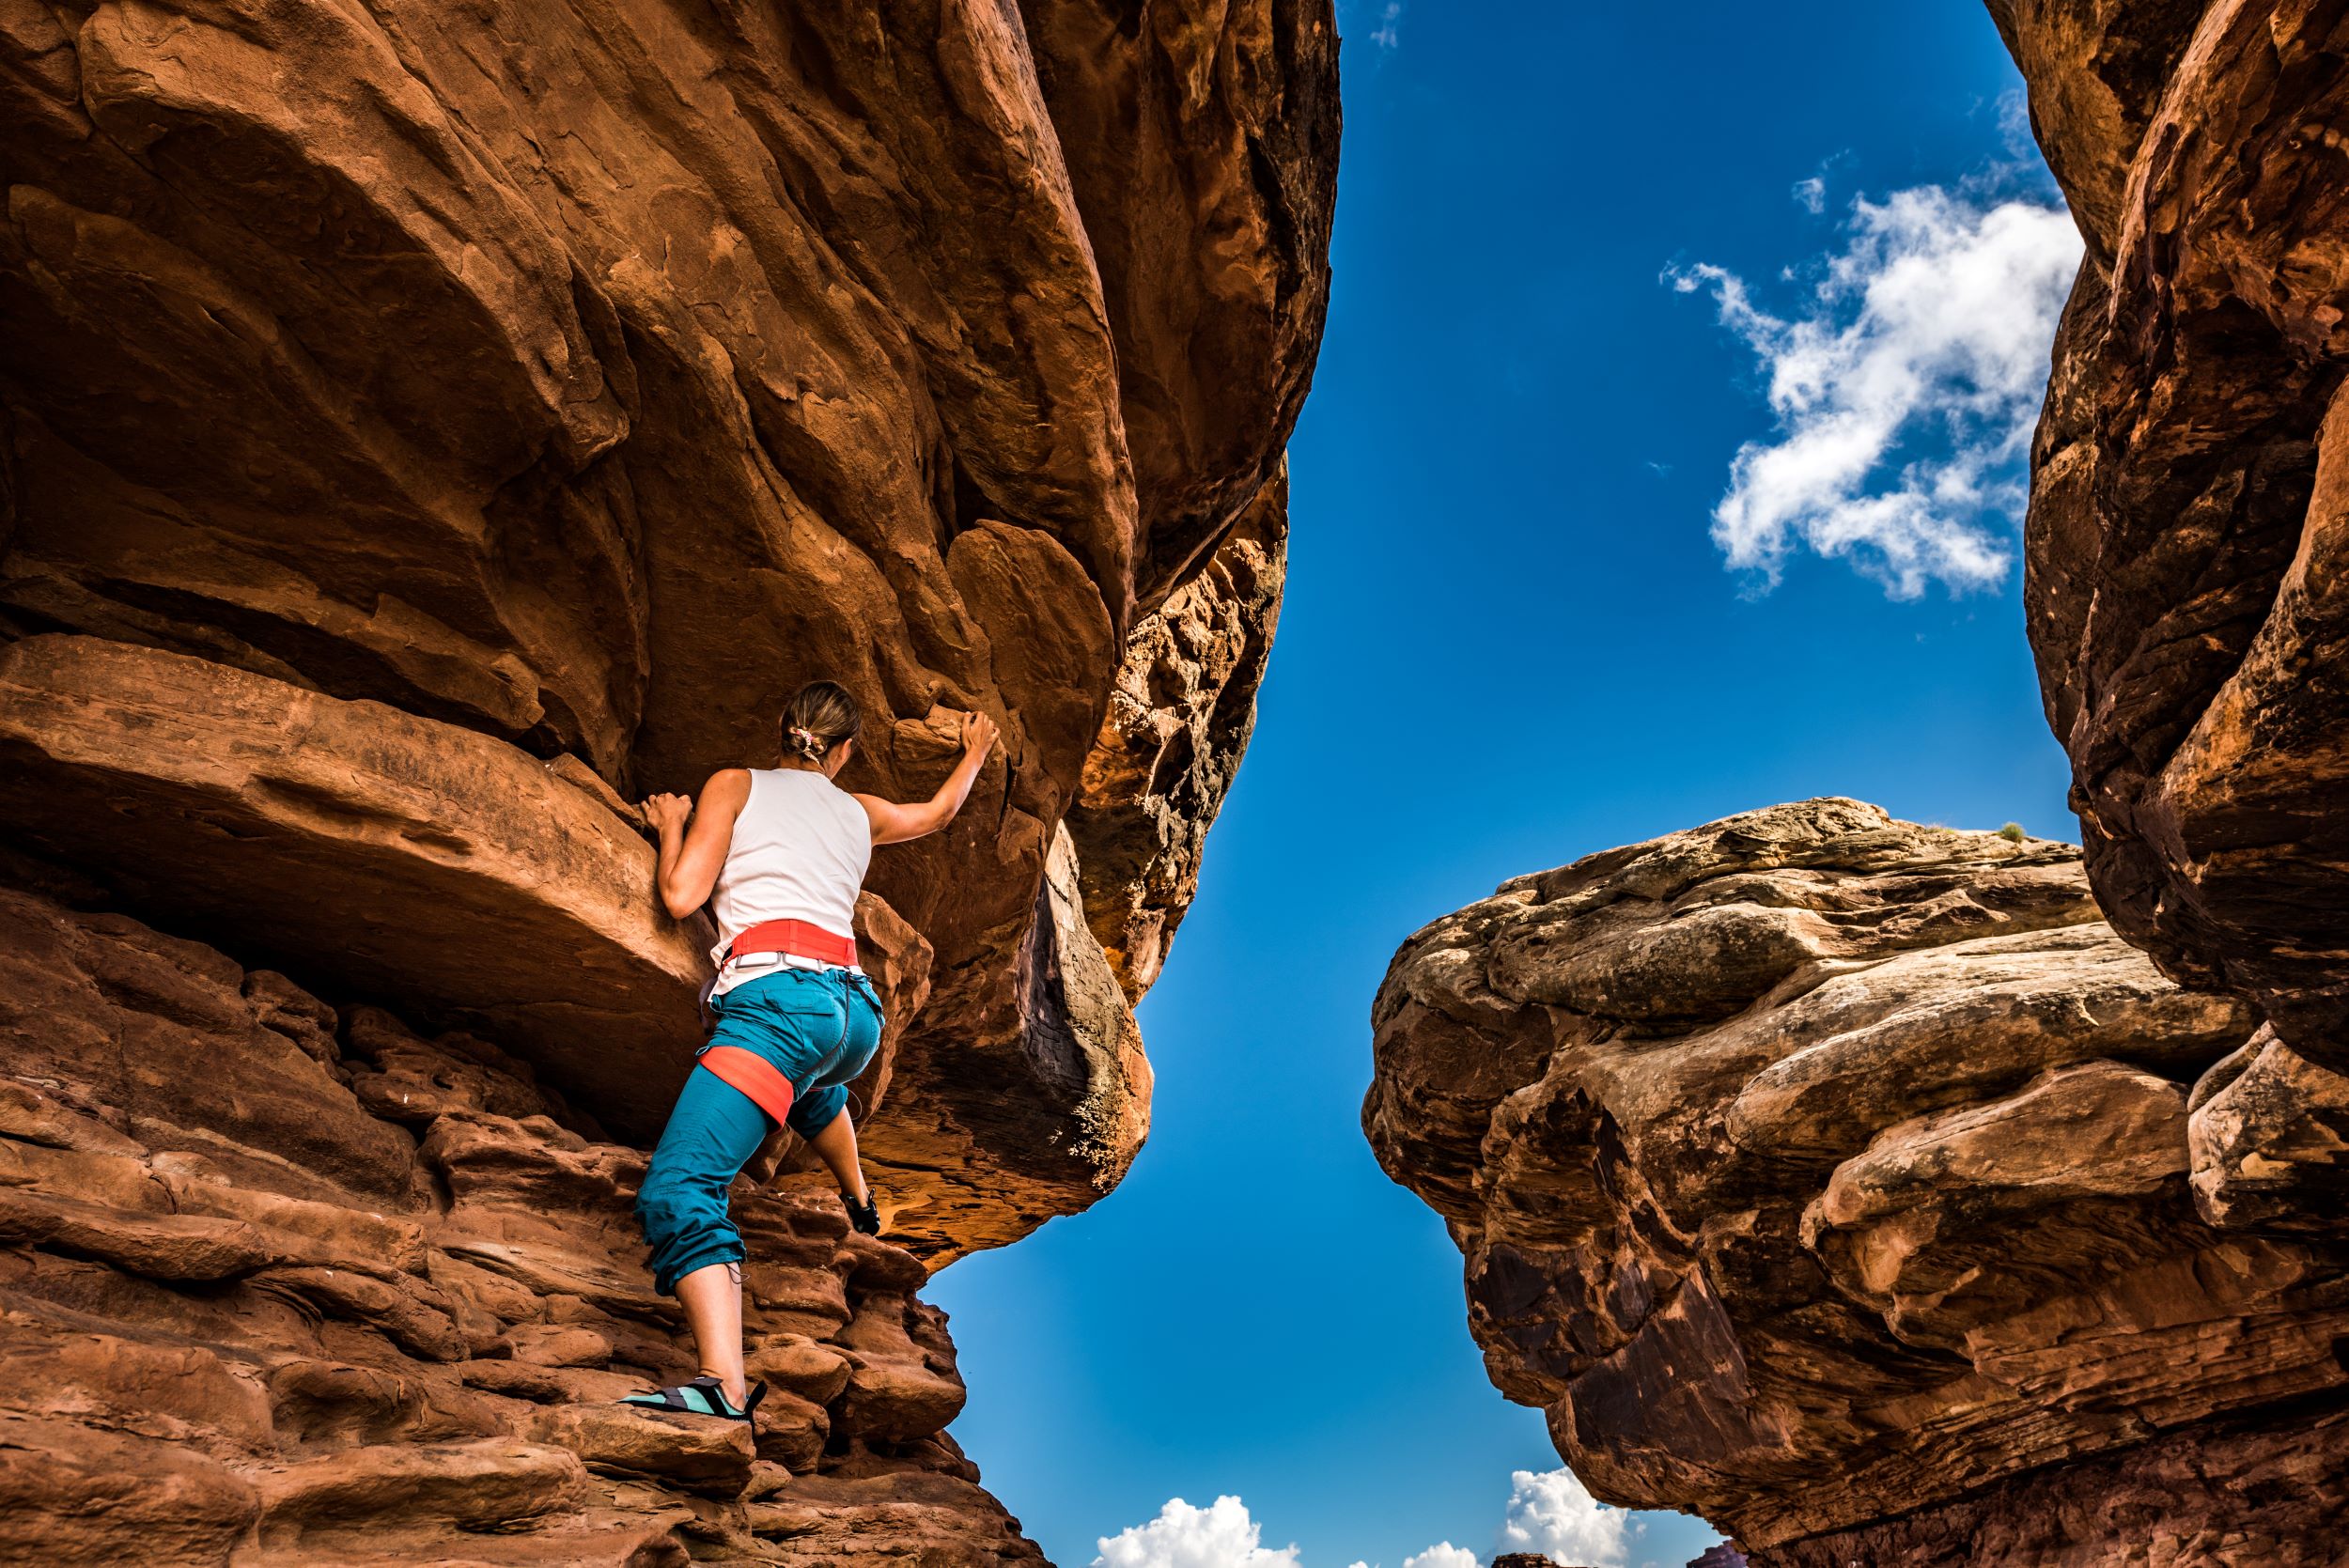 A climber on one of Utah's many red rock cliffs.